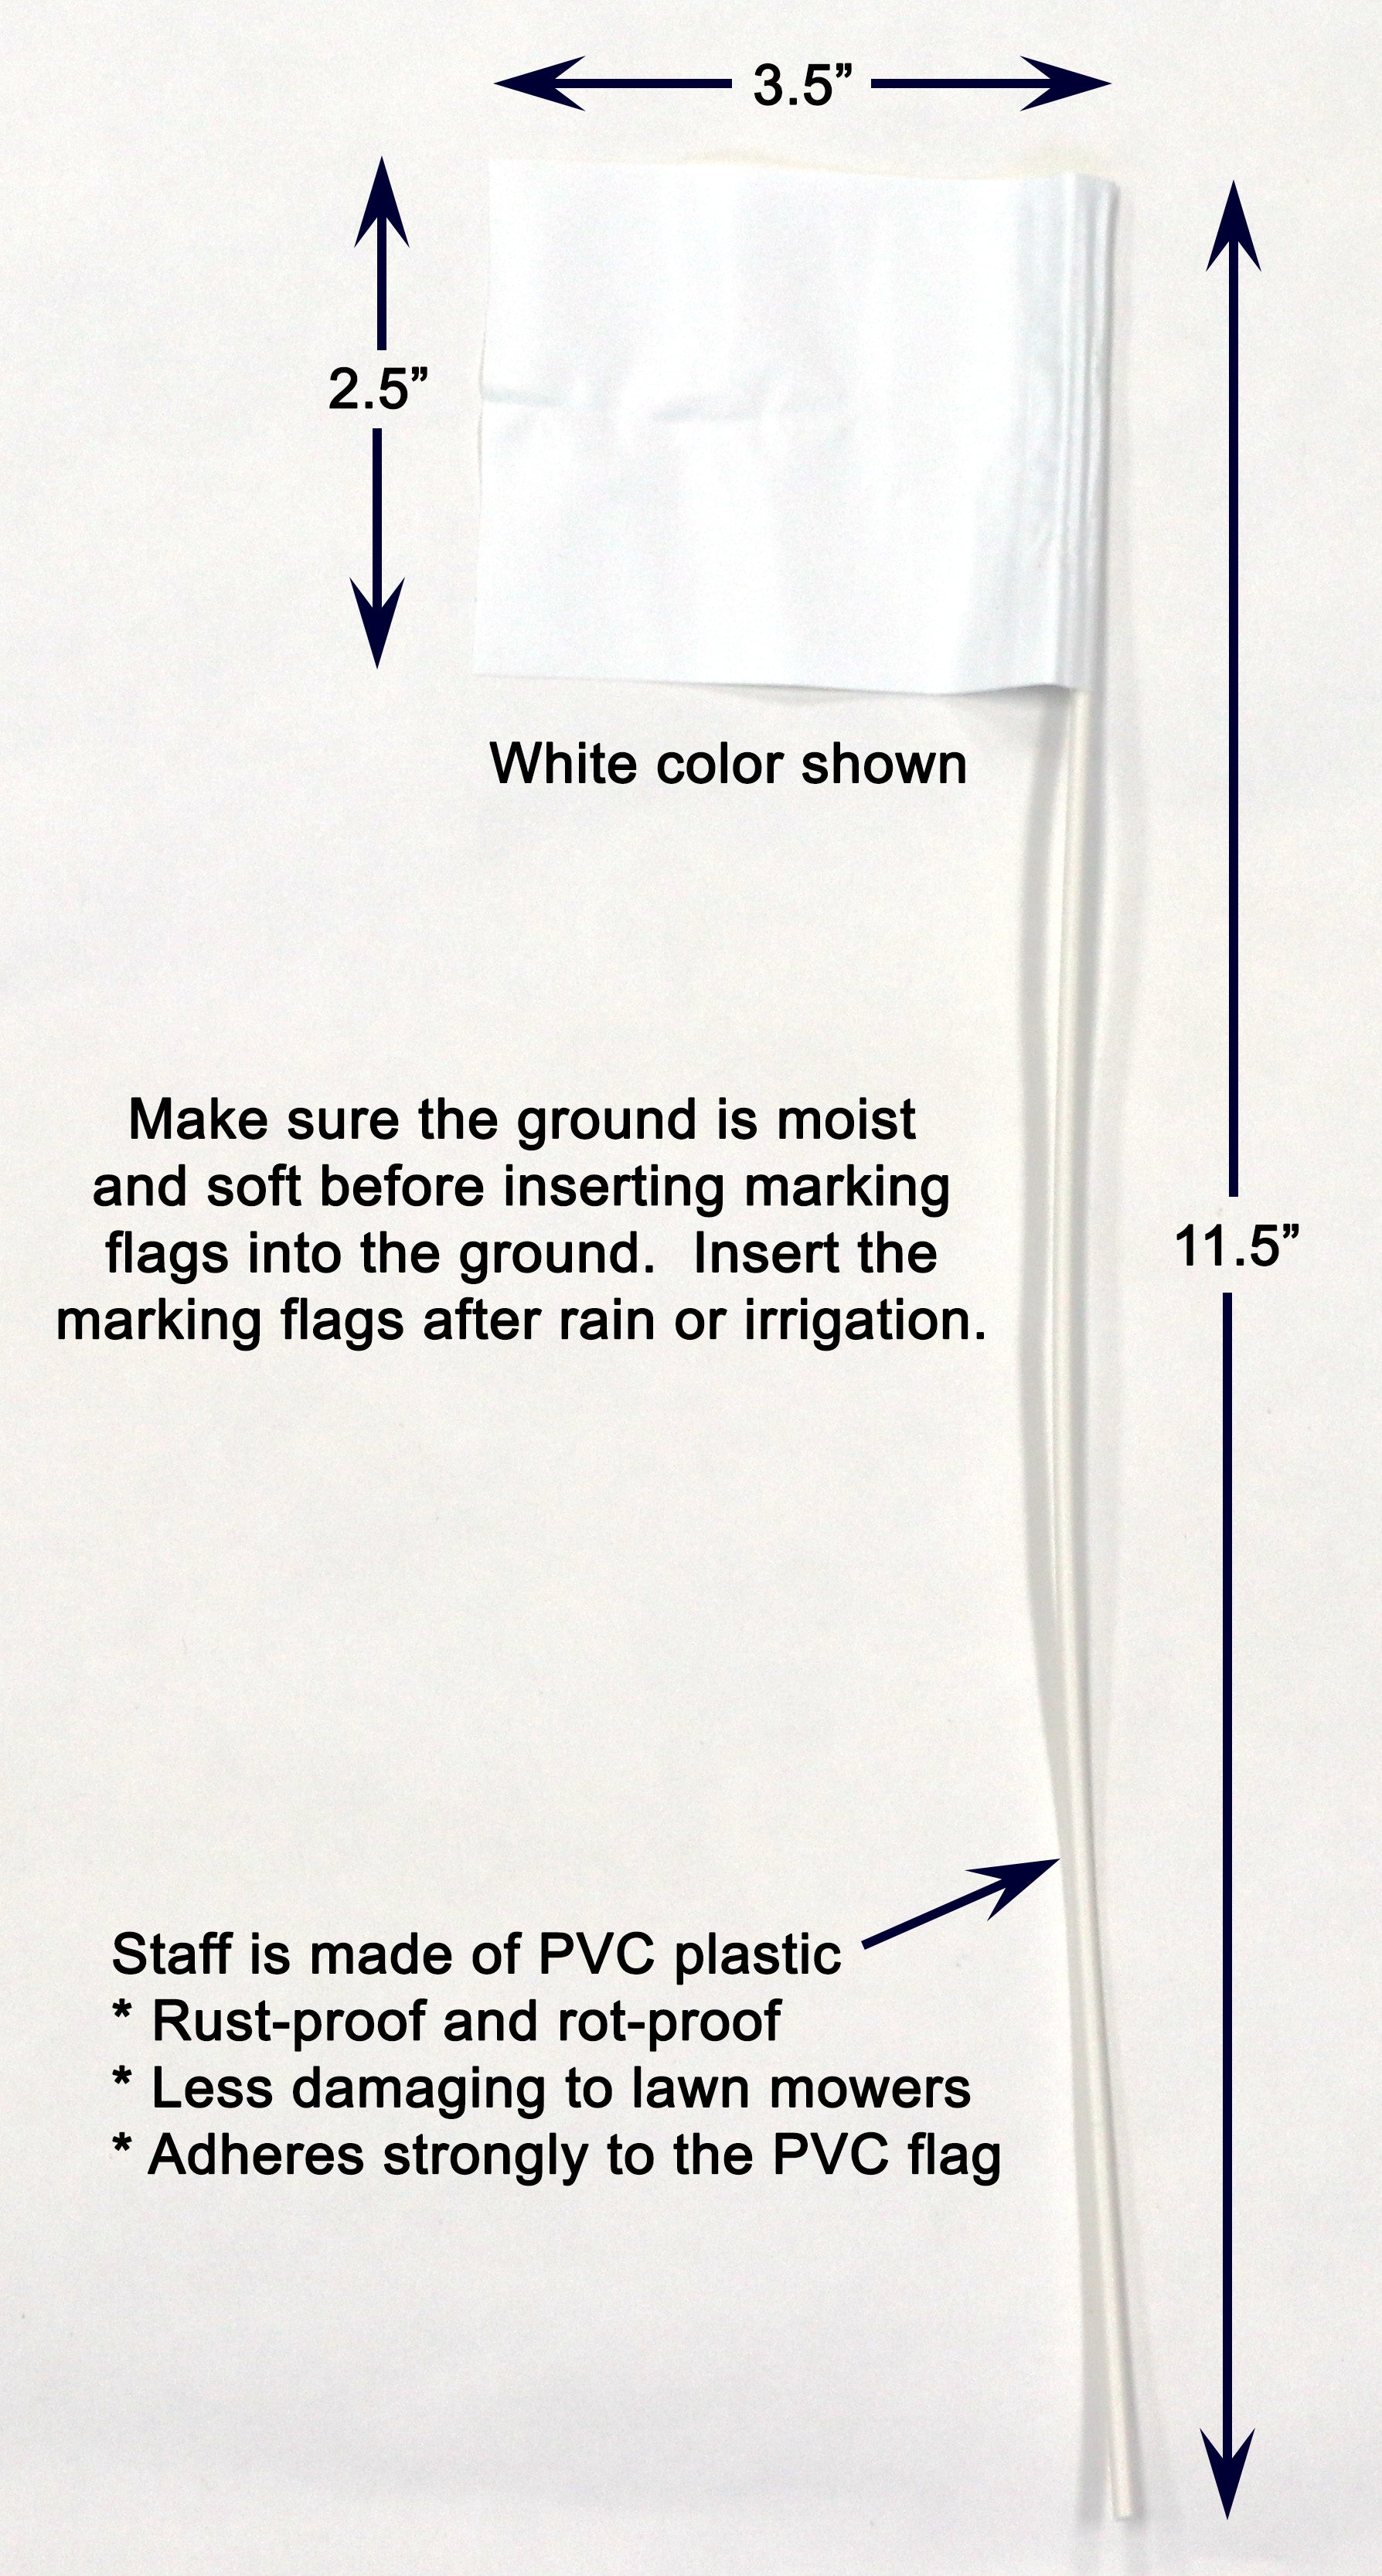 Stake Flags for Marking Sprinkler Heads and Other Objects